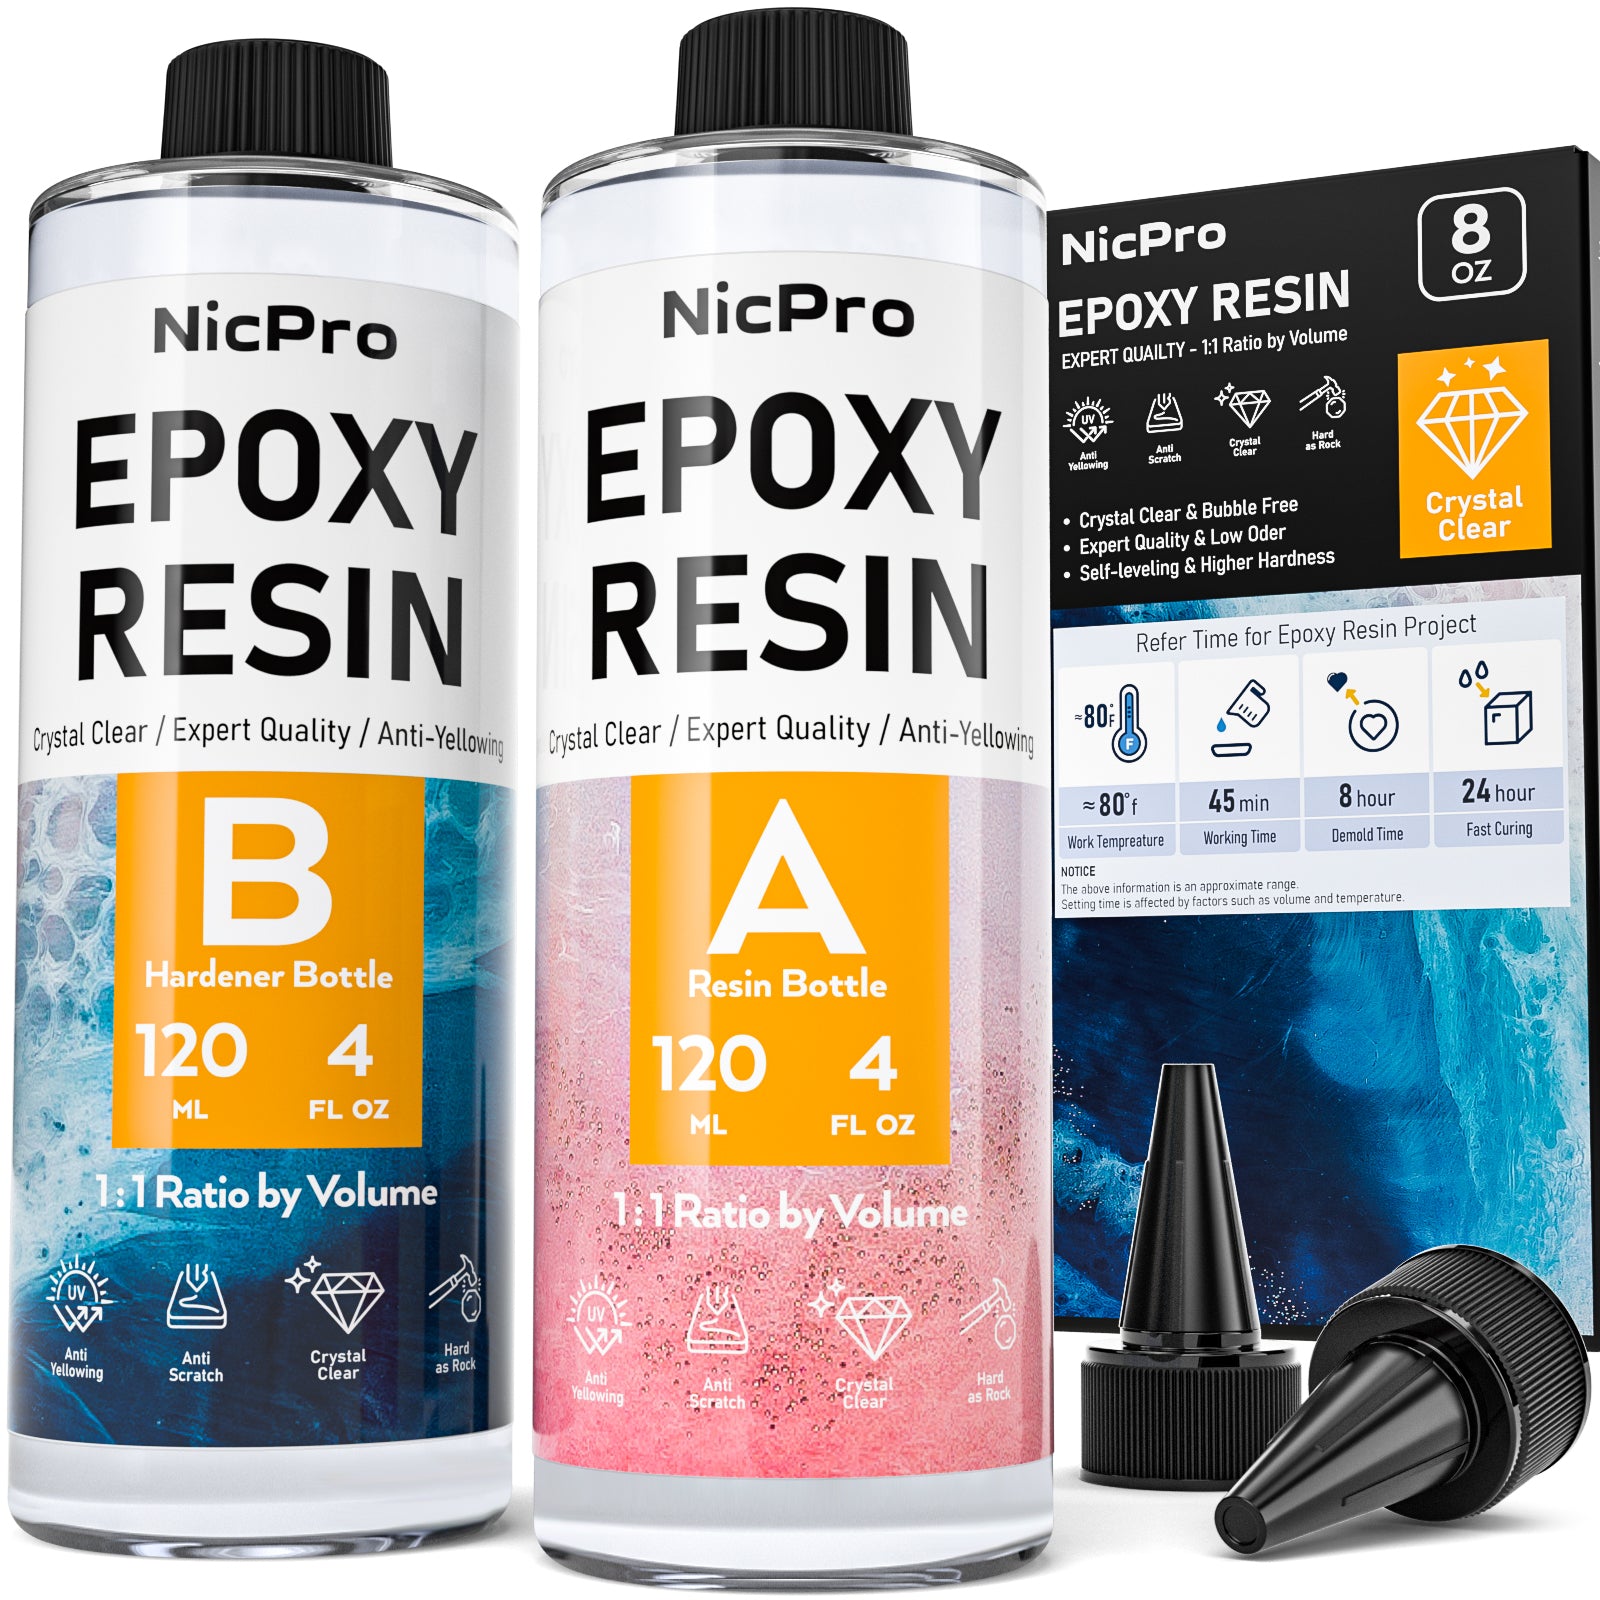 EPOXY Resin Crystal Clear 1 Gallon Kit | 1:1 Resin and Hardener for Super  Gloss Coating | for Bars, Outdoor Table Top, Countertop, Art | Safe for Use